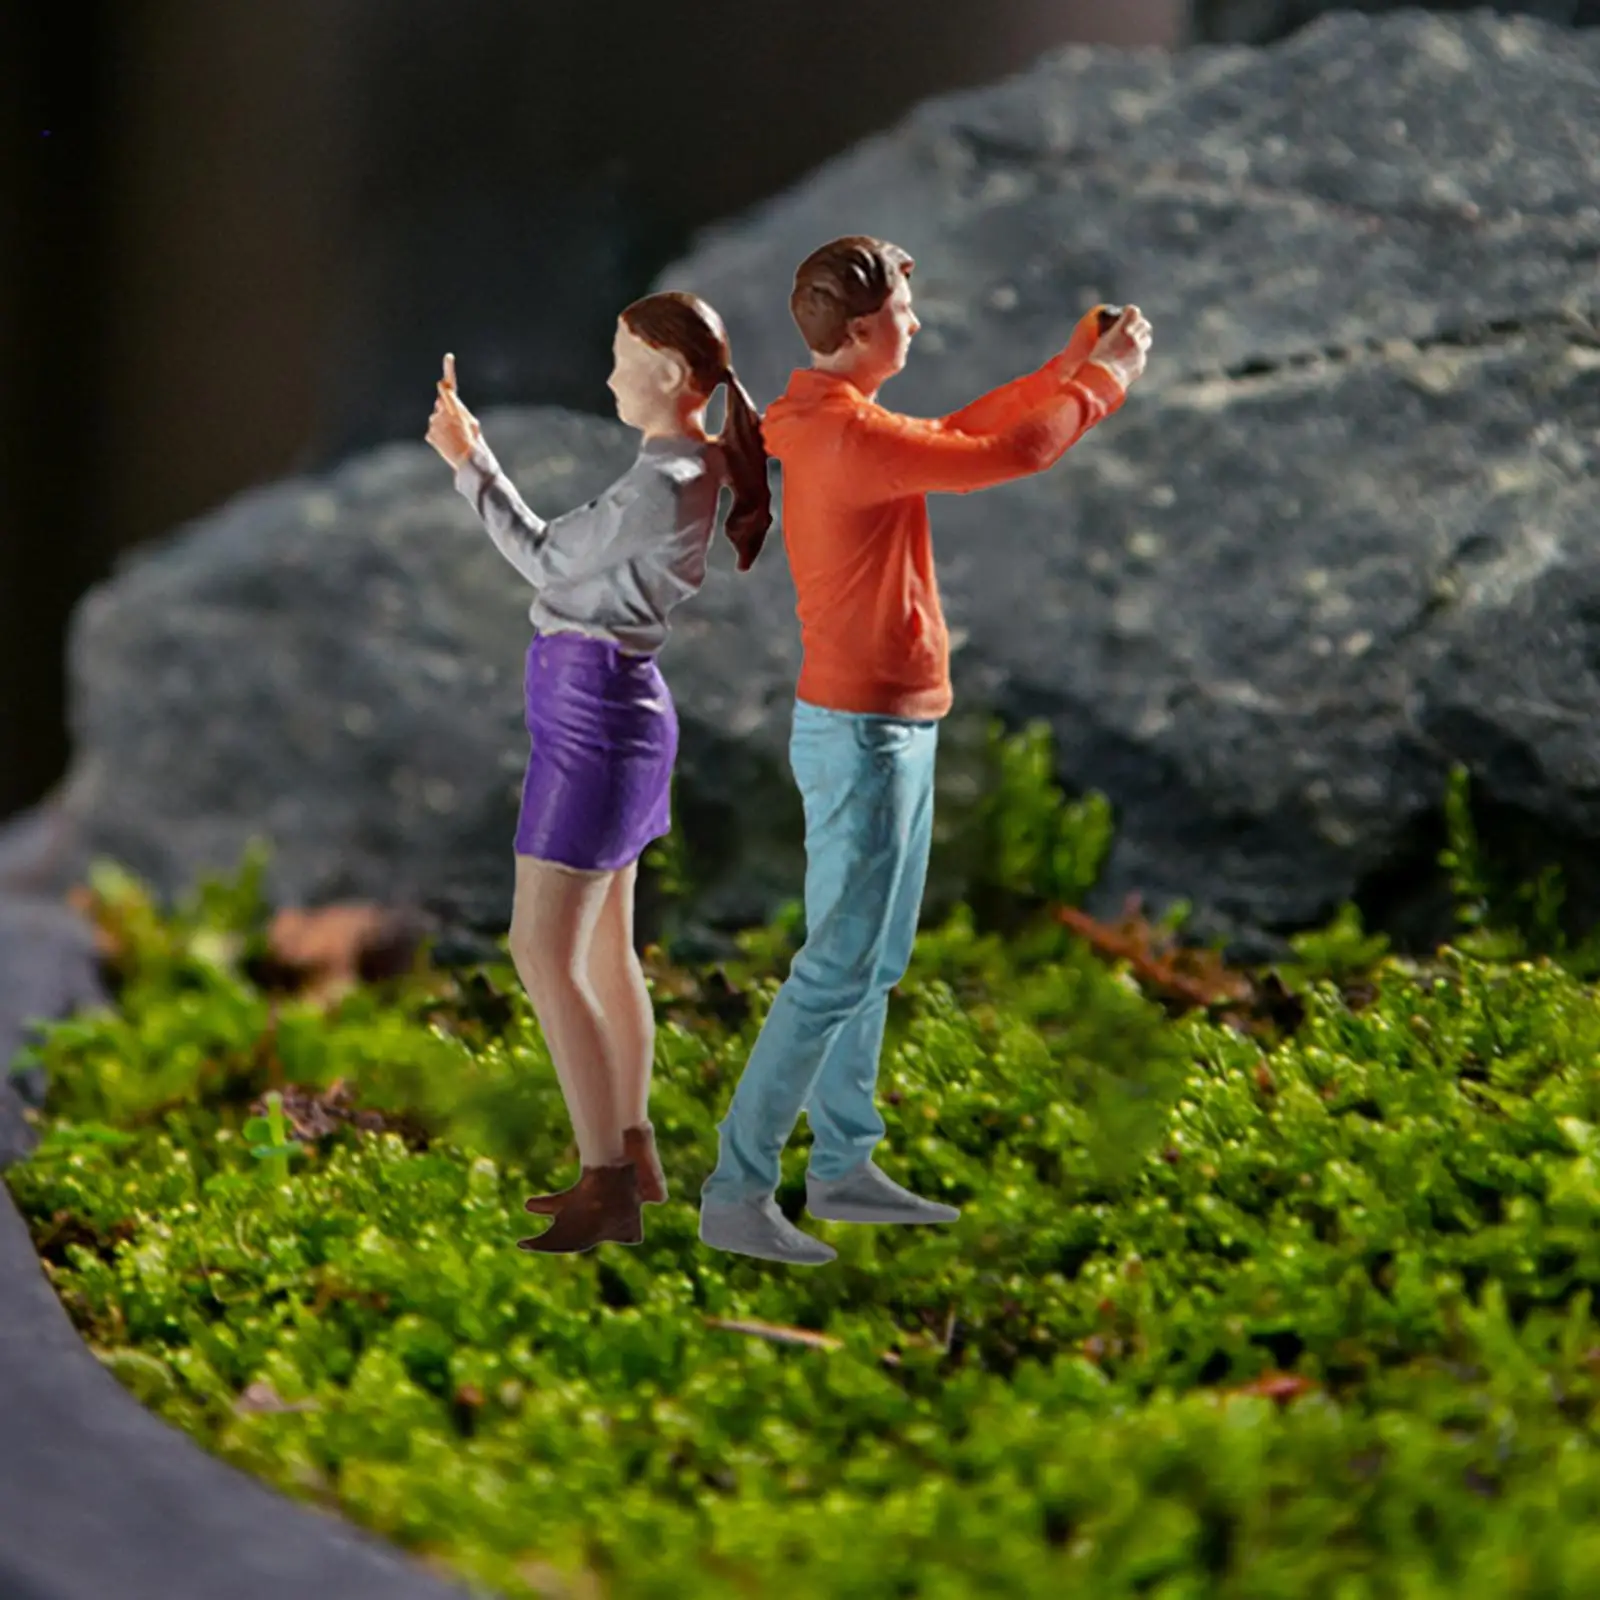 2Pcs 1: 64 Scale Miniature Couple Taking Photo Model Model Trains People Figures for Photography Props Scenery Landscape Layout